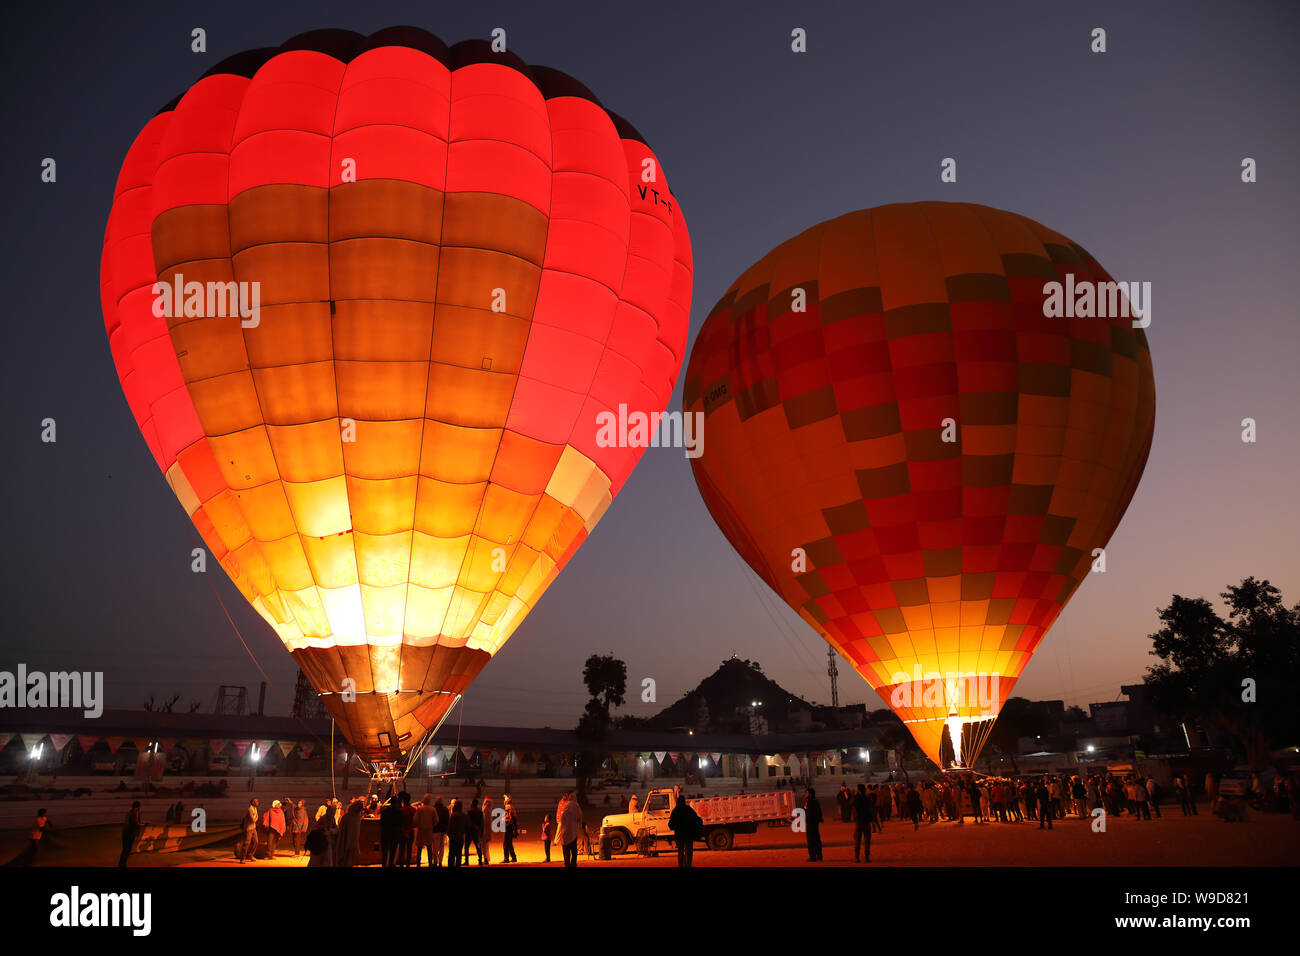 Hot air balloons at the Mela Ground of the Camel Fair in Pushkar, Rajasthan India. The fair is the largest camel fair in India. Stock Photo